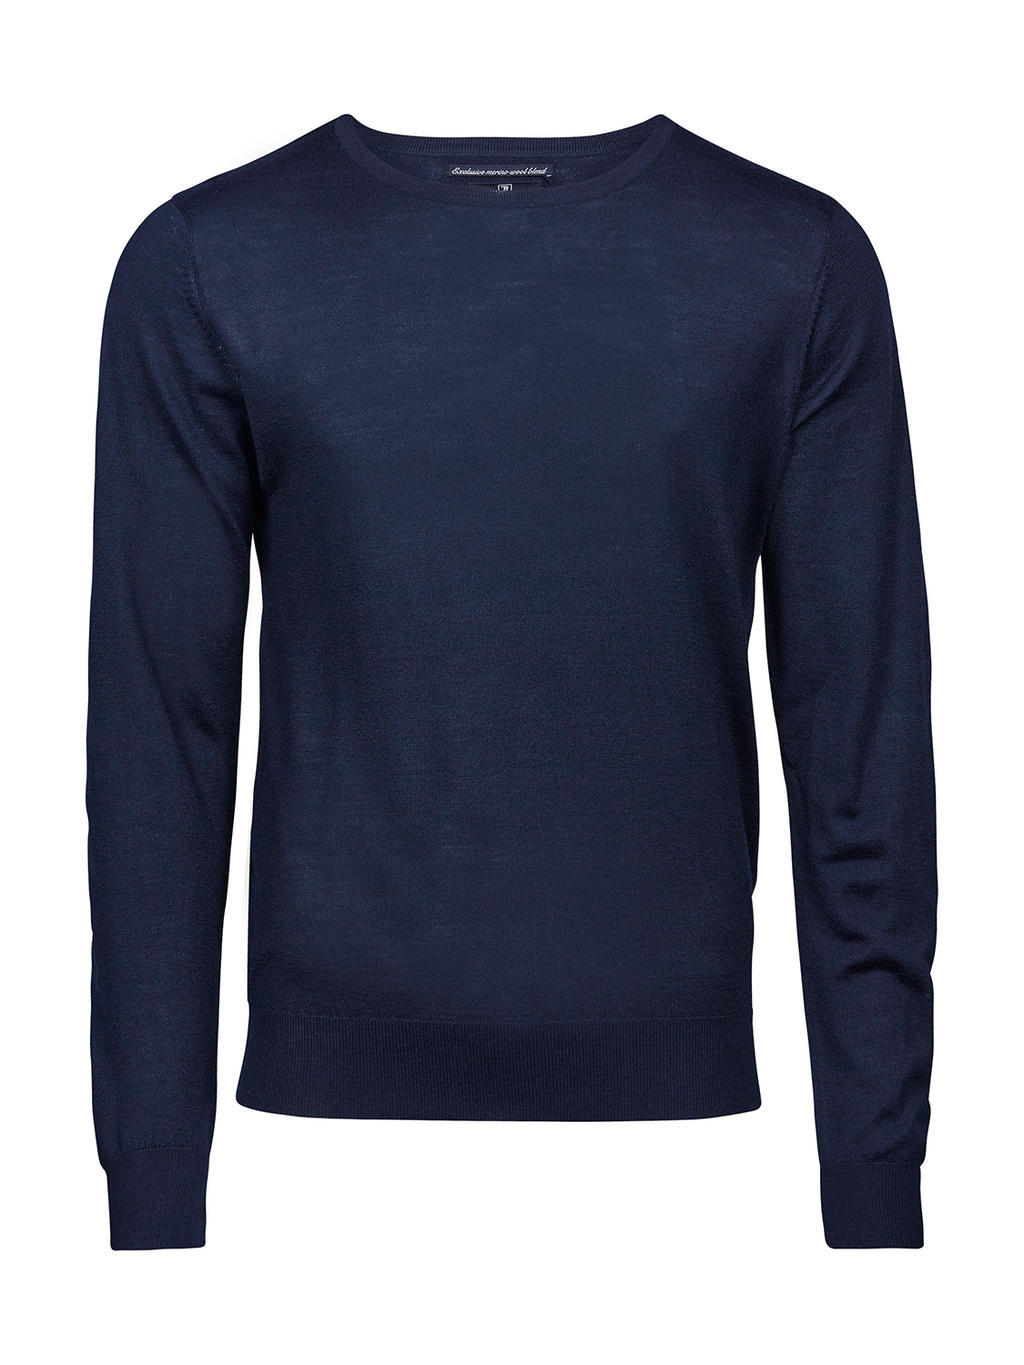  Mens Crew Neck Sweater in Farbe Navy